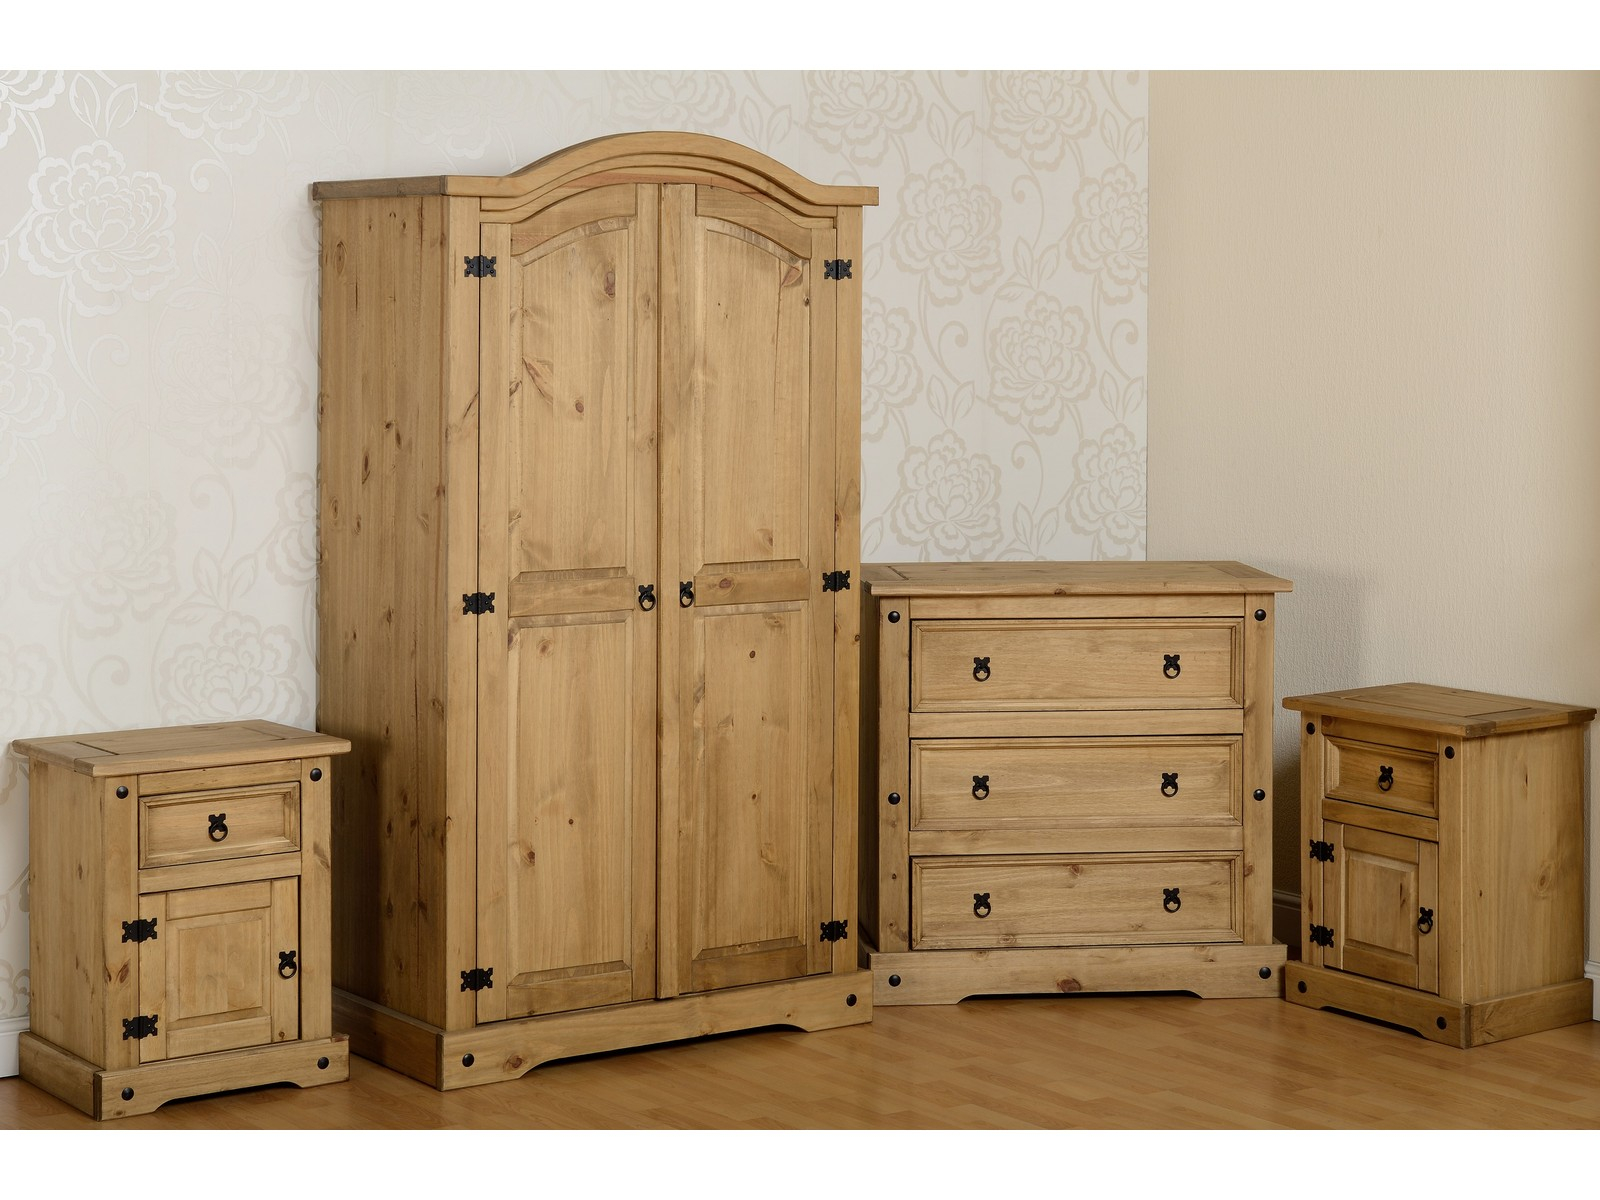 Details About Corona Mexican Pine 4 Piece Bedroom Furniture Set Wardrobe Chest Bedside Pair with regard to sizing 1600 X 1200